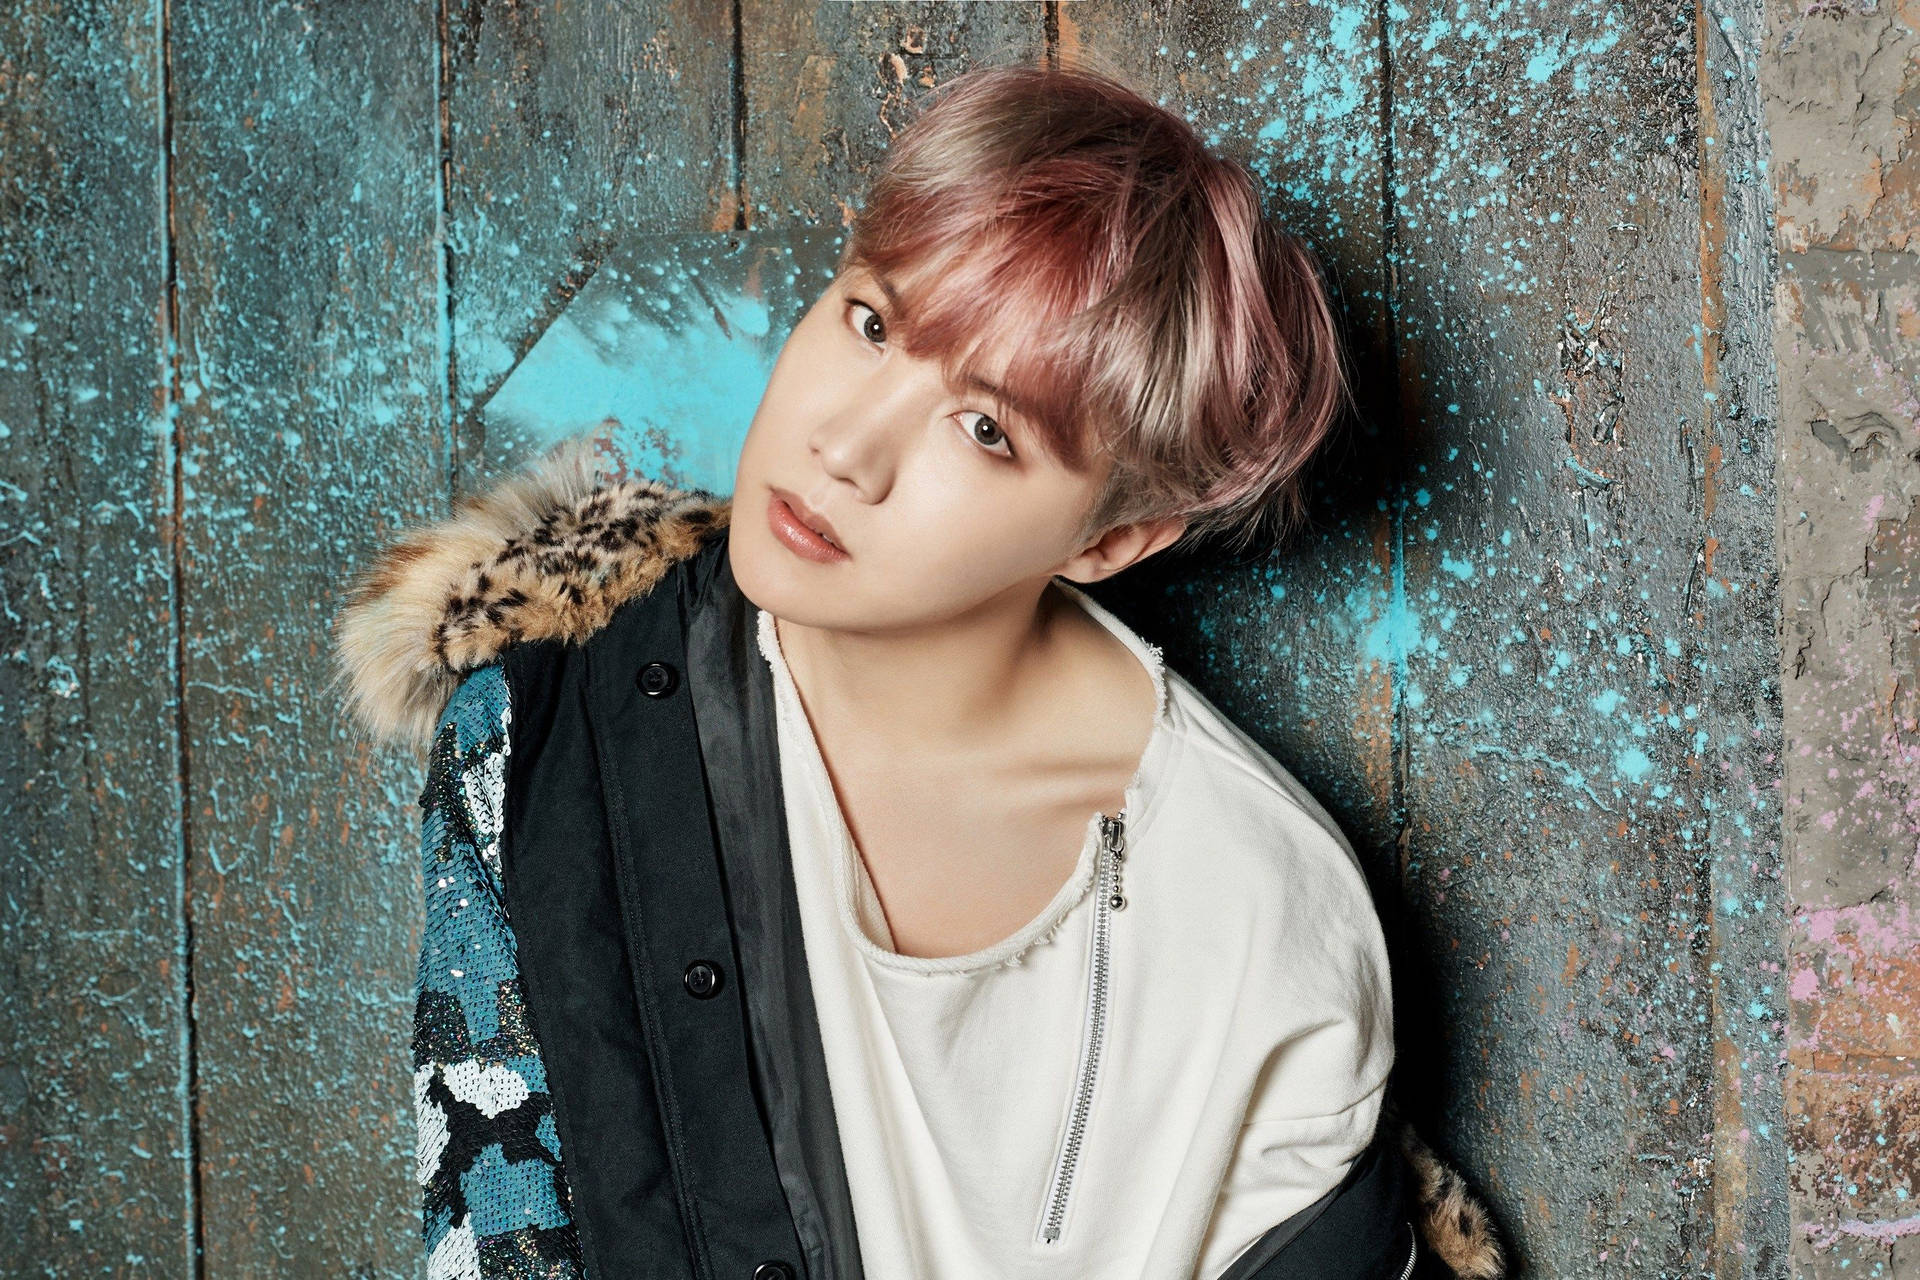 100+] Jhope Cute Wallpapers For Free | Wallpapers.Com